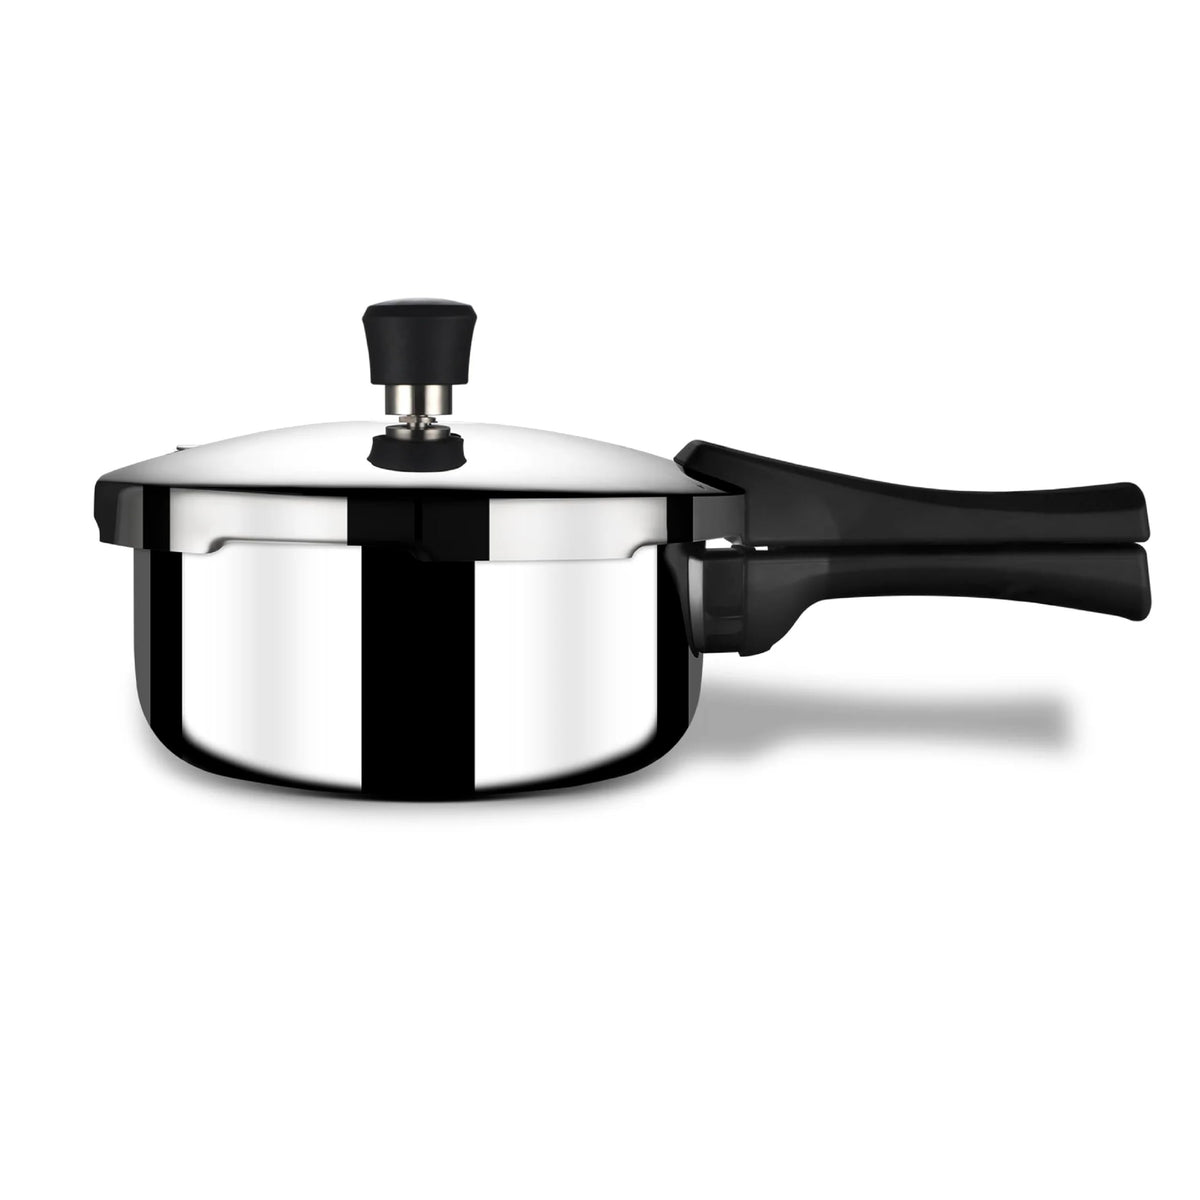 Stahl Triply Stainless Steel Xpress Pressure Cooker Outer Lid Baby, 9261, 1.0 Liters (Serves 1 Person)